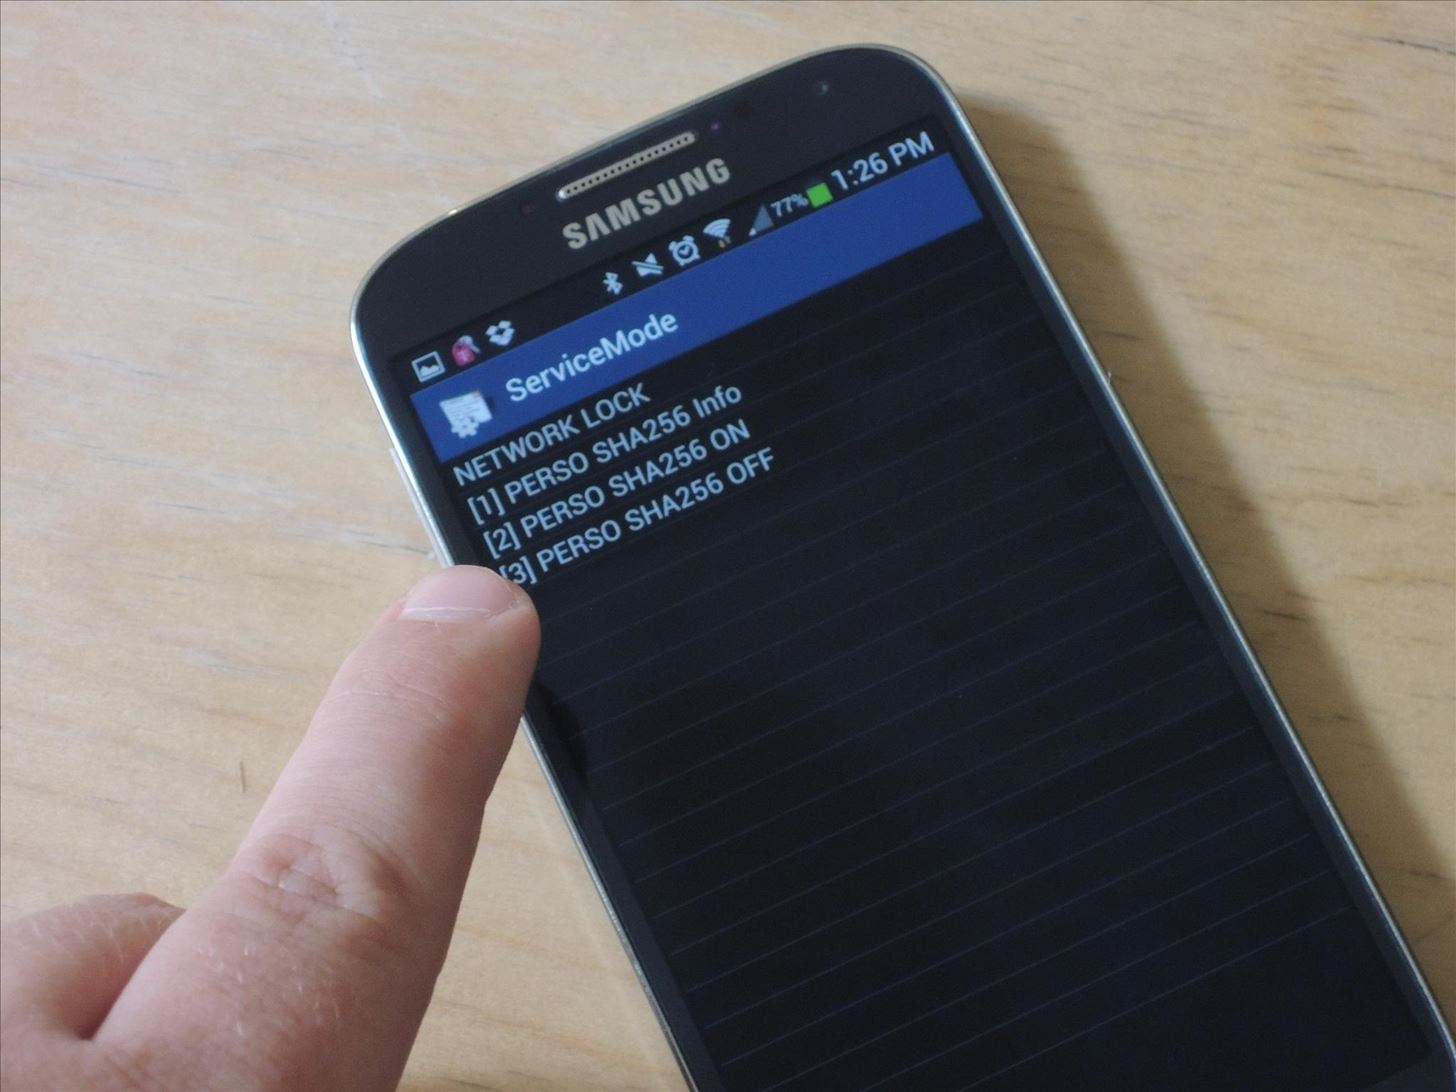 How to Carrier Unlock Your Samsung Galaxy S4 So You Can Use Another SIM Card